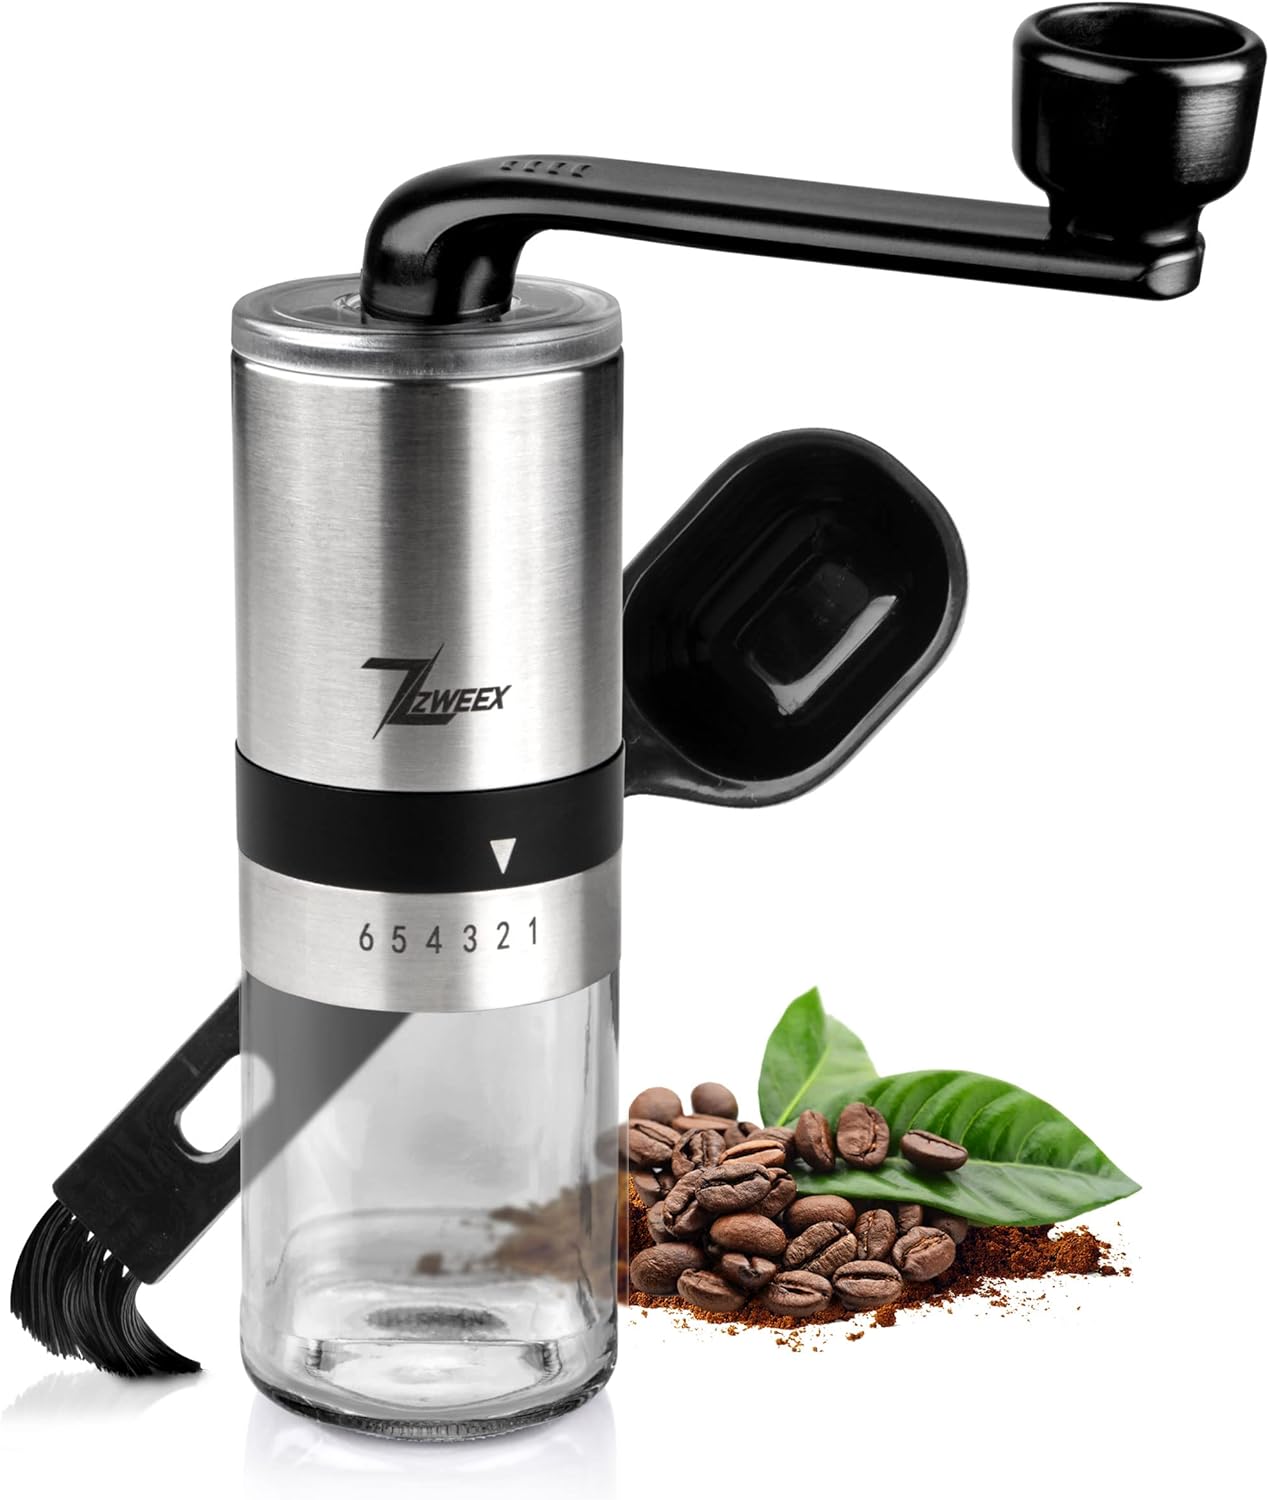 ZWEEX Manual Coffee Grinder Stainless Steel and Glass Hand Coffee Grinder Ceramic Grinder Coffee Grinder Hand Coffee Grinder With 6 Grinding Settings Espresso Grinder Includes Brush and Bag